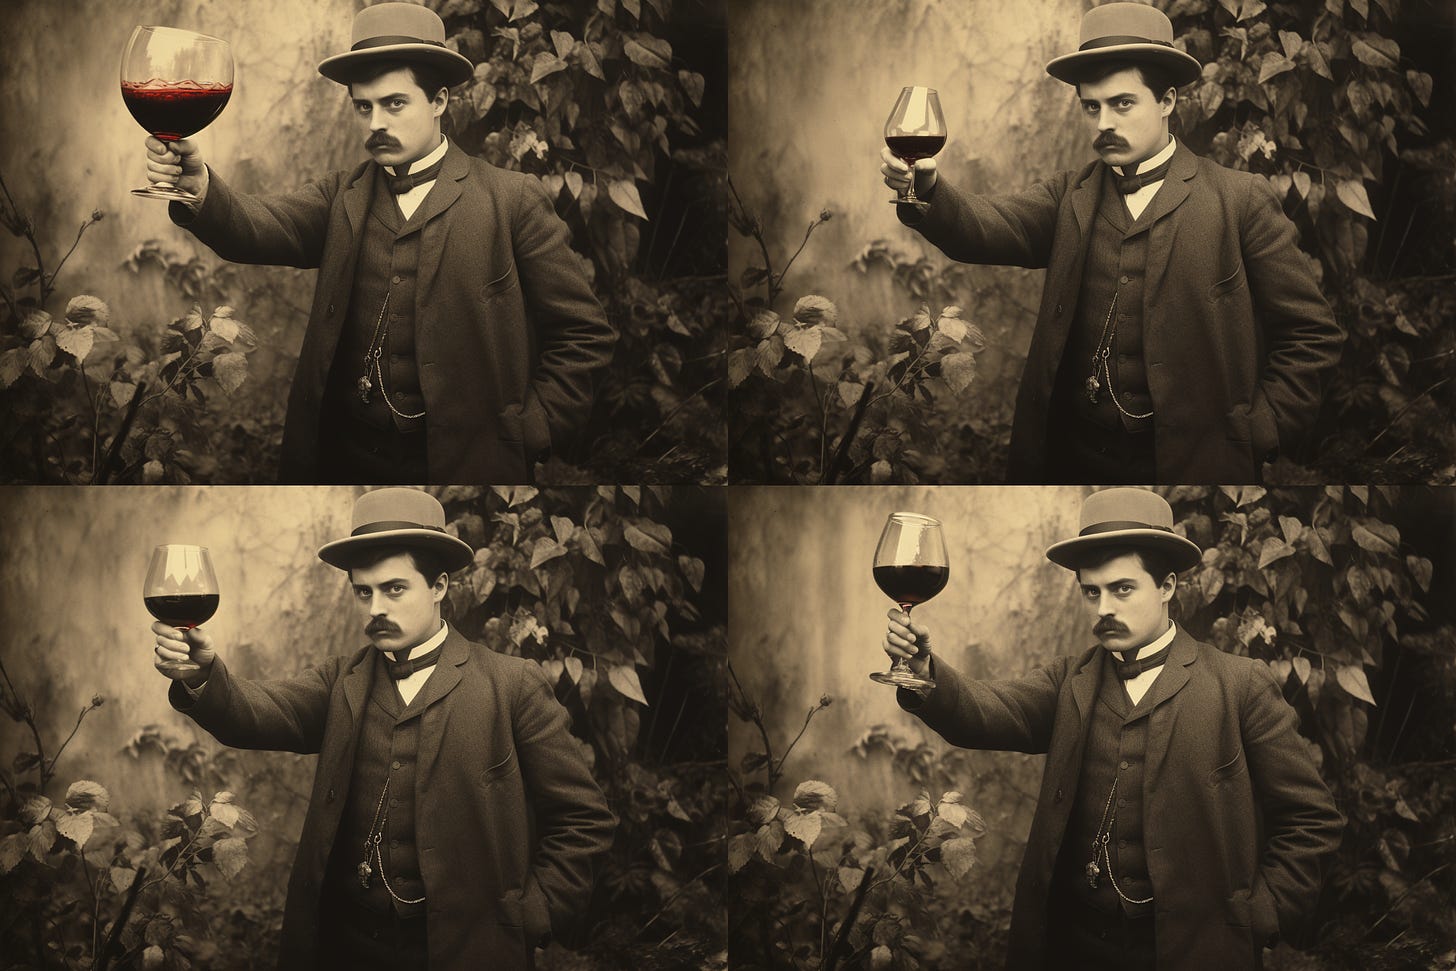 Four variations of a Victorian man holding a glass of wine